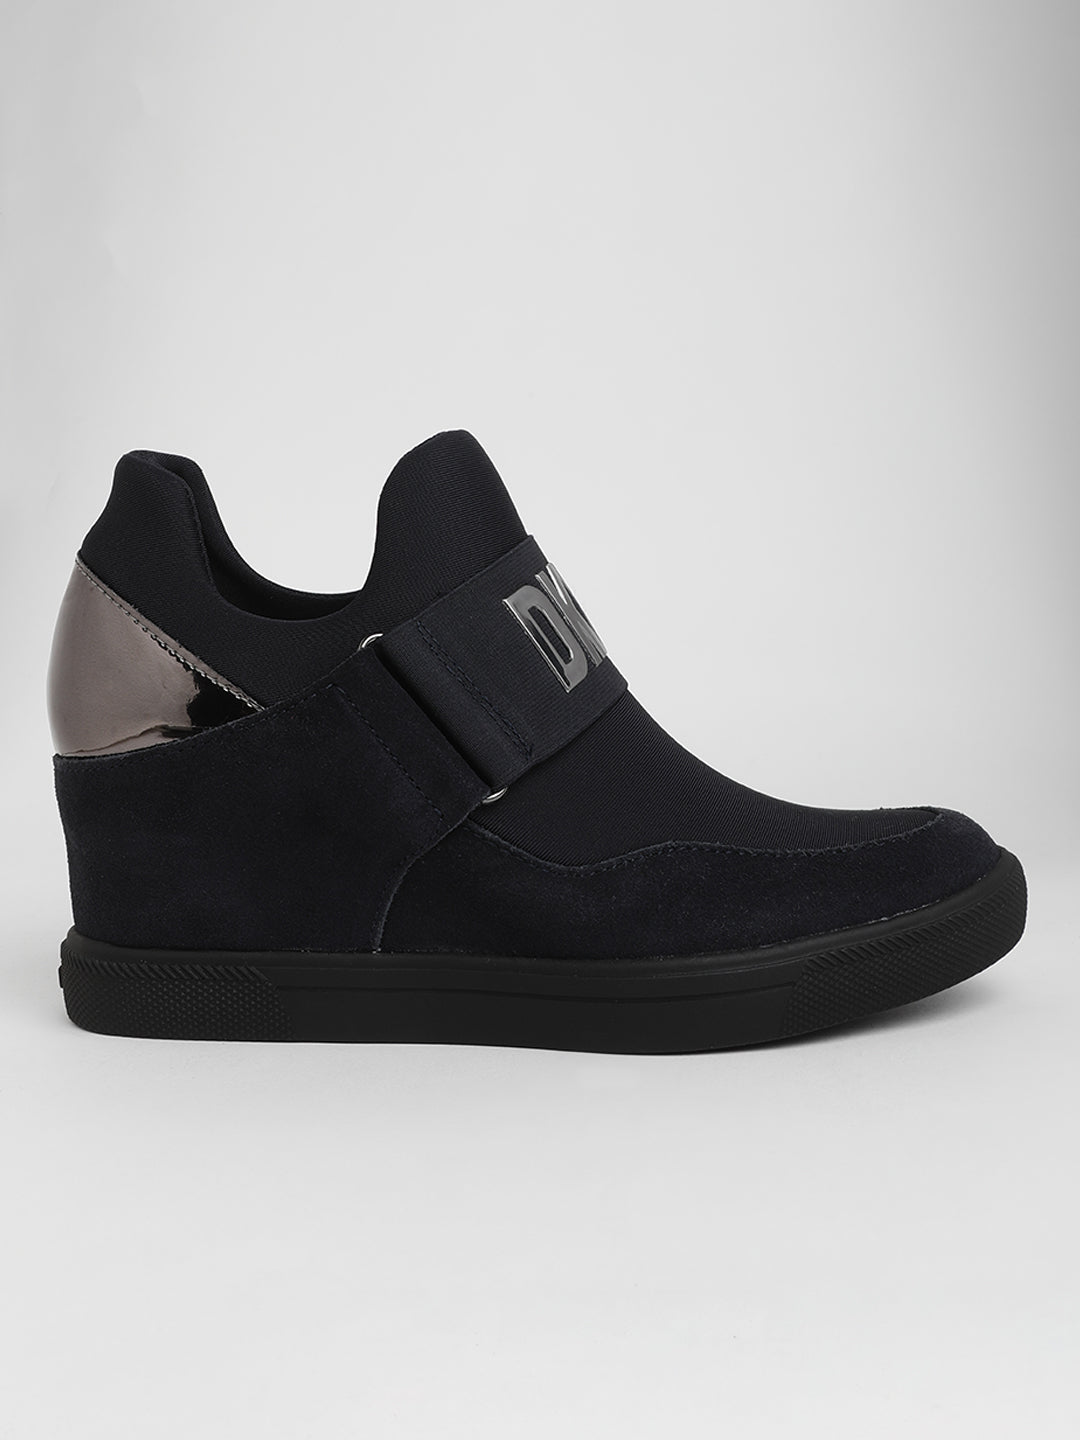 DKNY Cailin Leather and Suede Wedge Sneakers | Dillard's